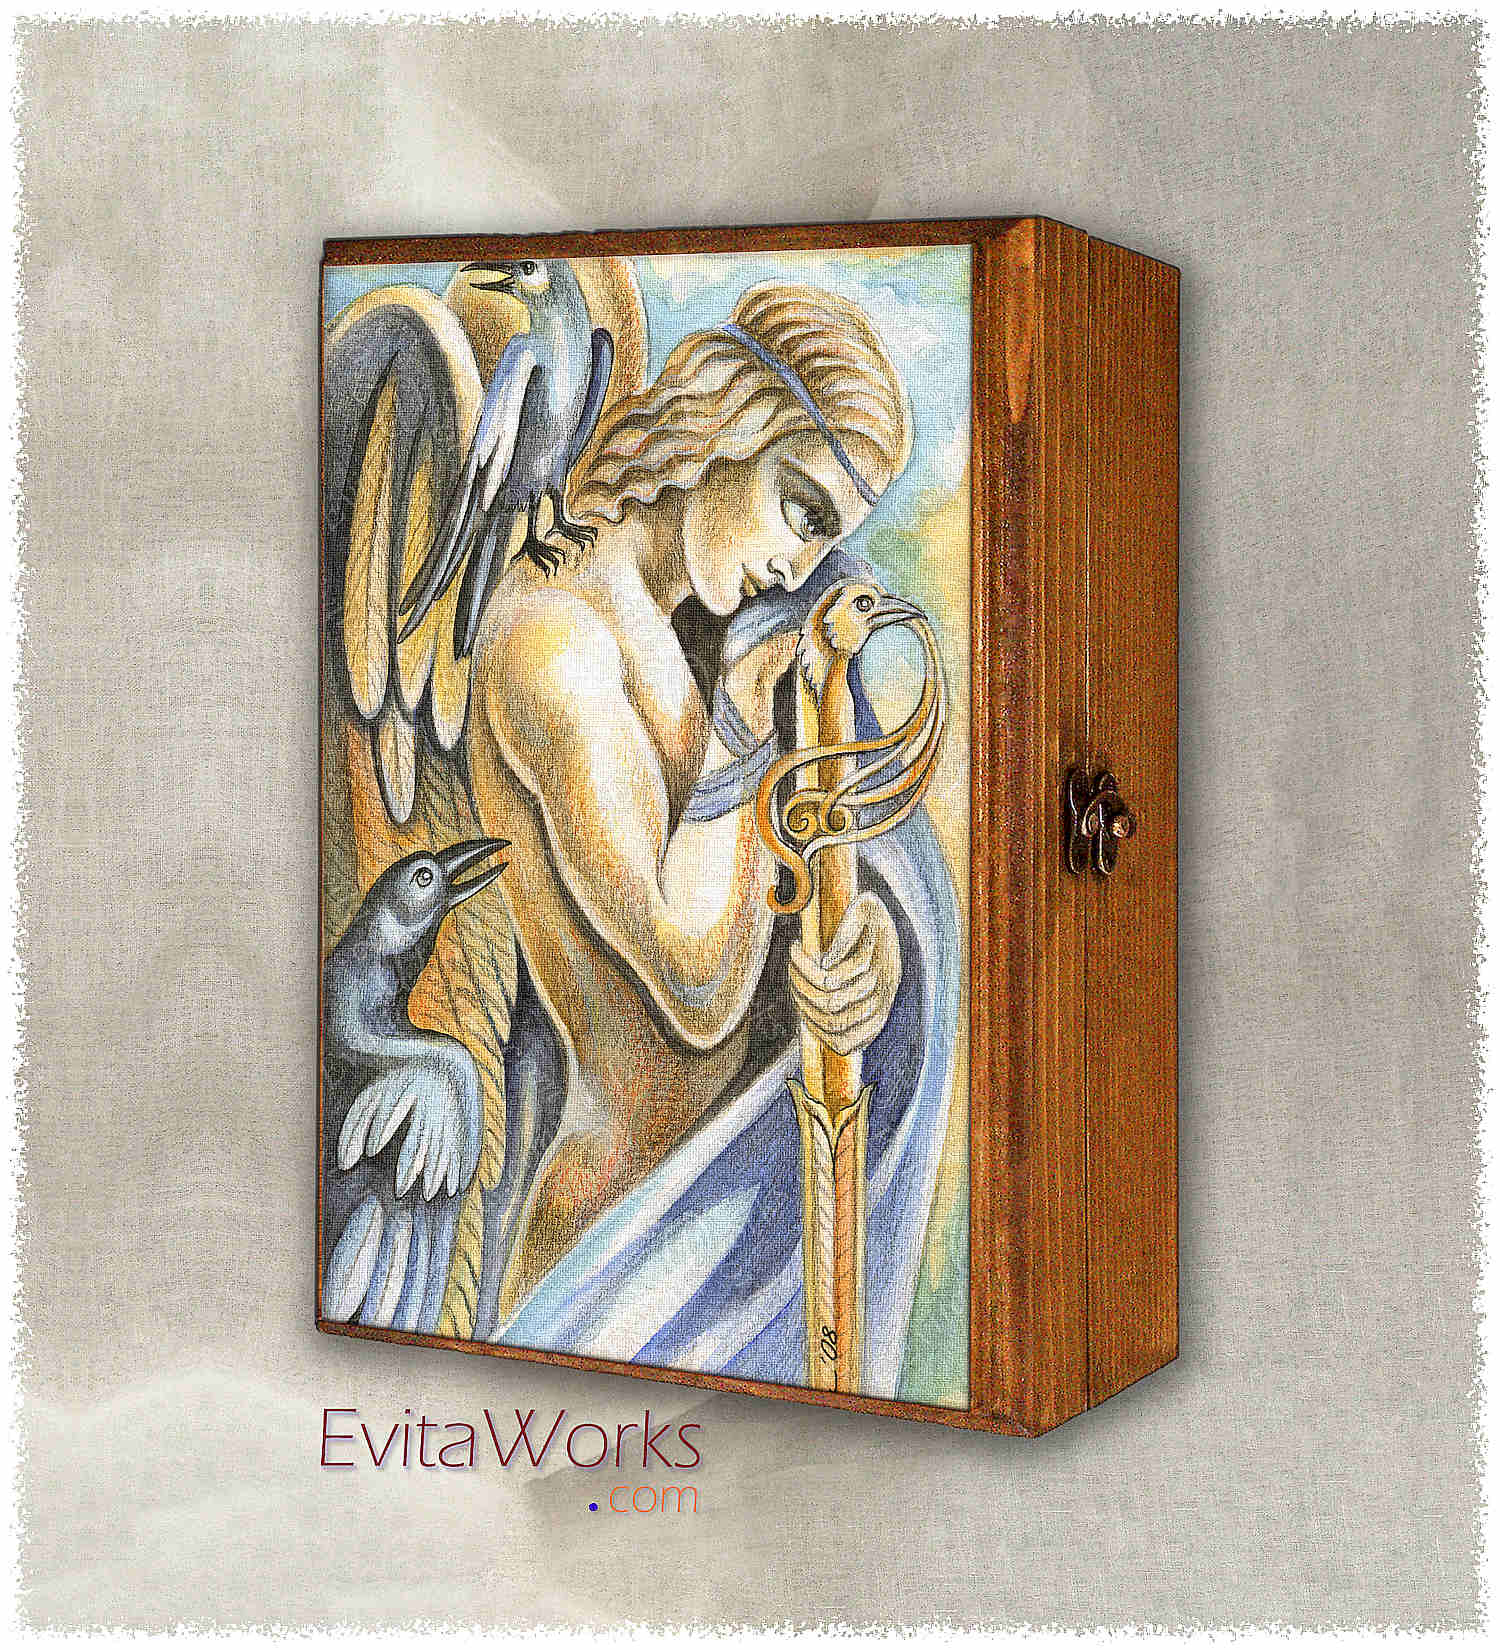 Hit to learn about "Angel 02, mythical man art" on jewelboxes